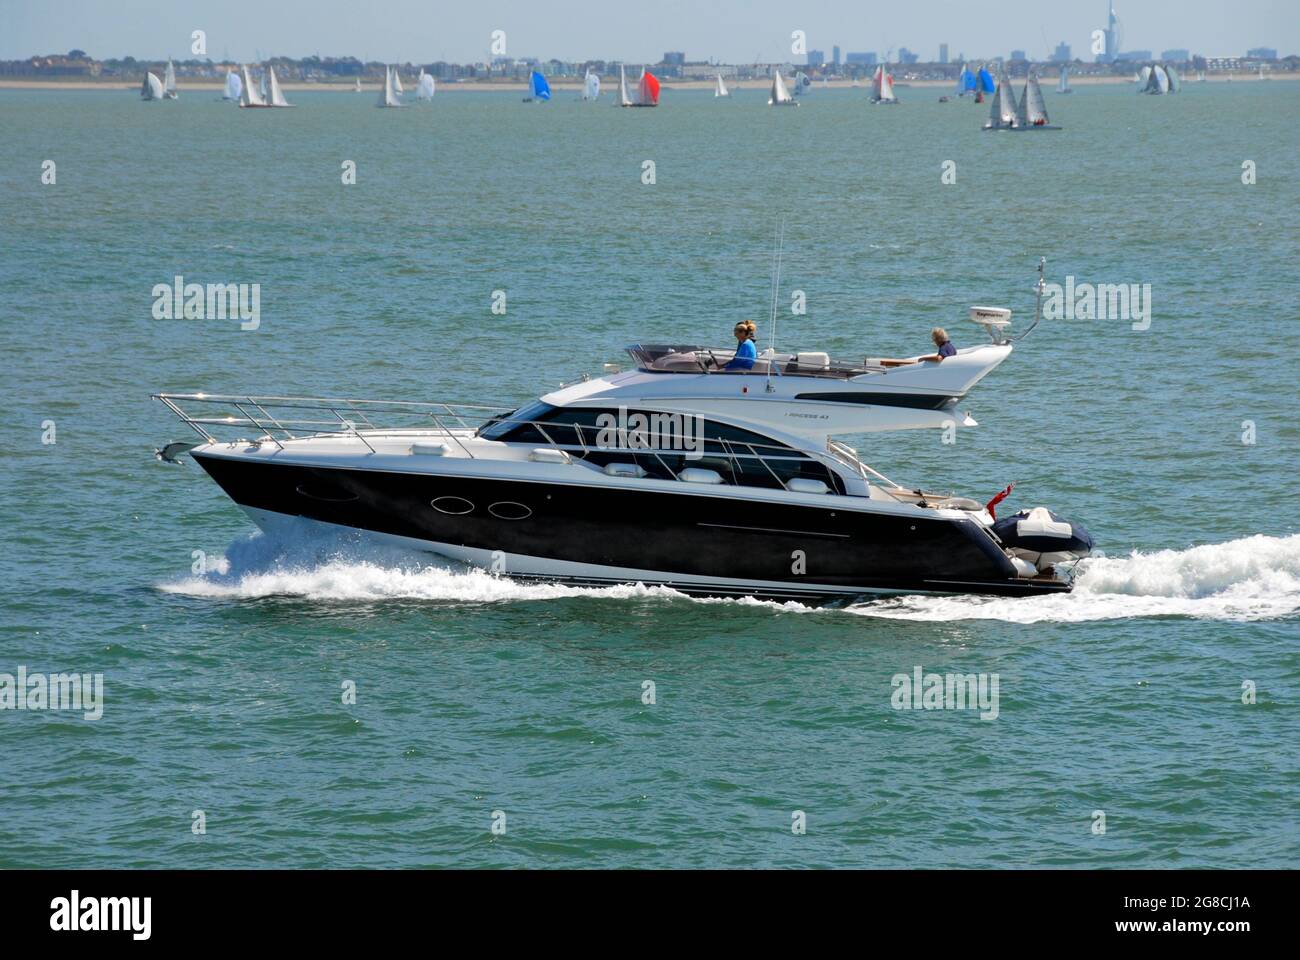 Two-tiered motor cruise on the Solent during Cowes Week with many yachts beyond Stock Photo